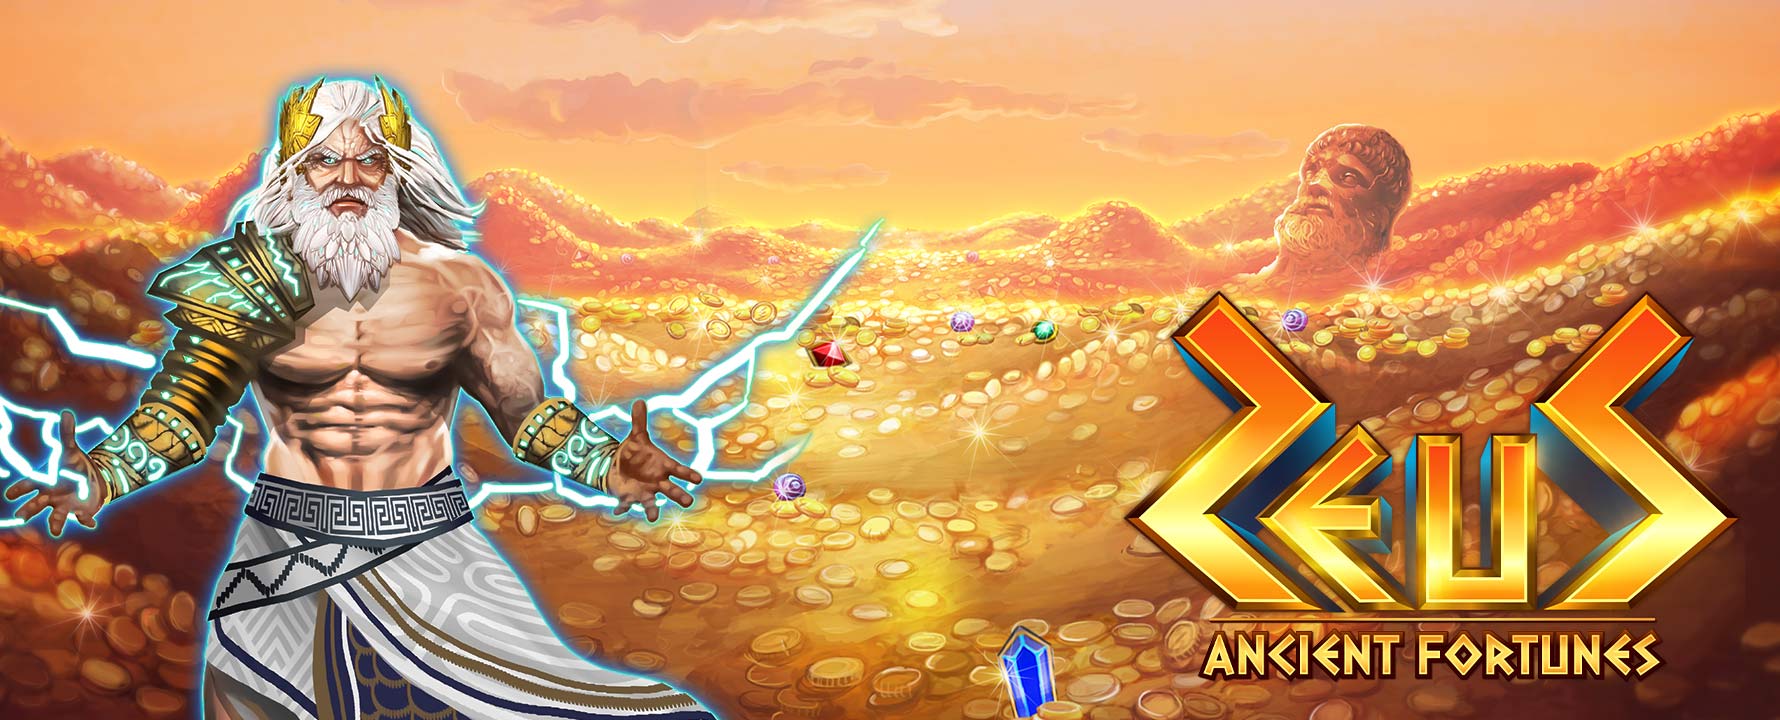 Introducing the Ancient Fortunes: Zeus online slot from Microgaming!